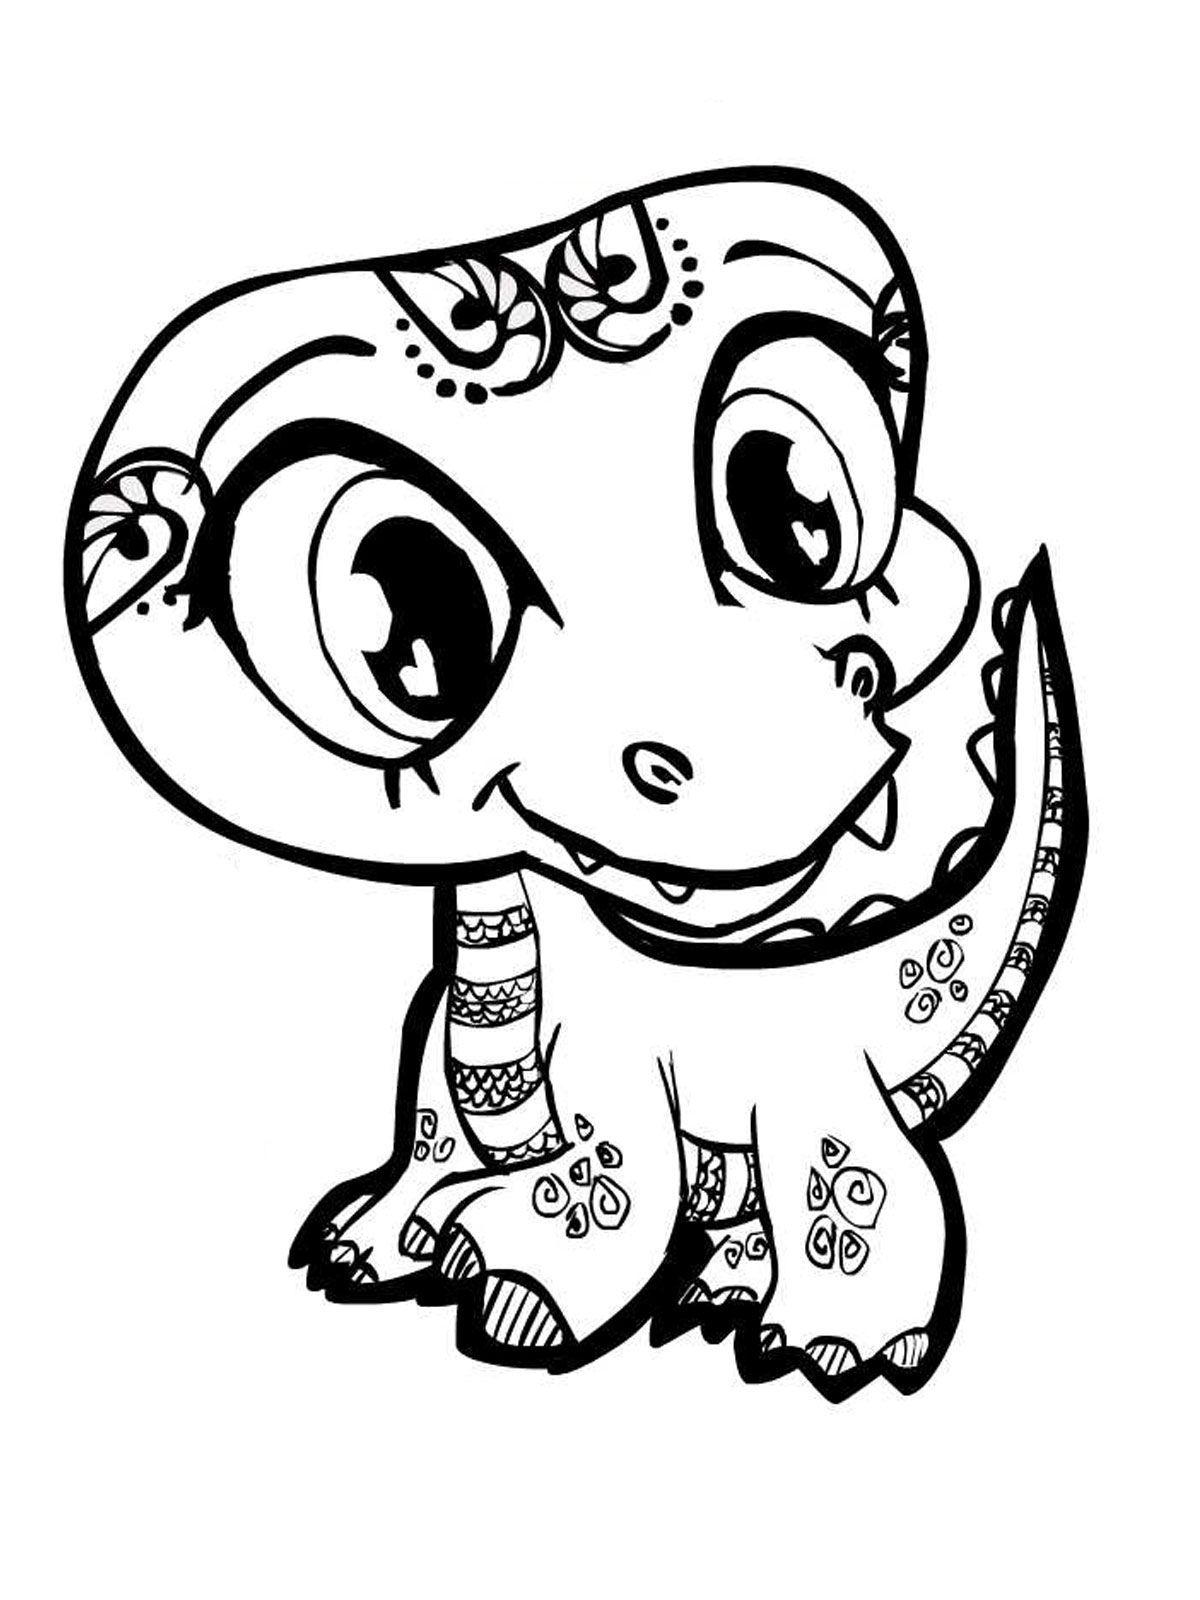 Cute animal coloring pages for girls | www.veupropia.org